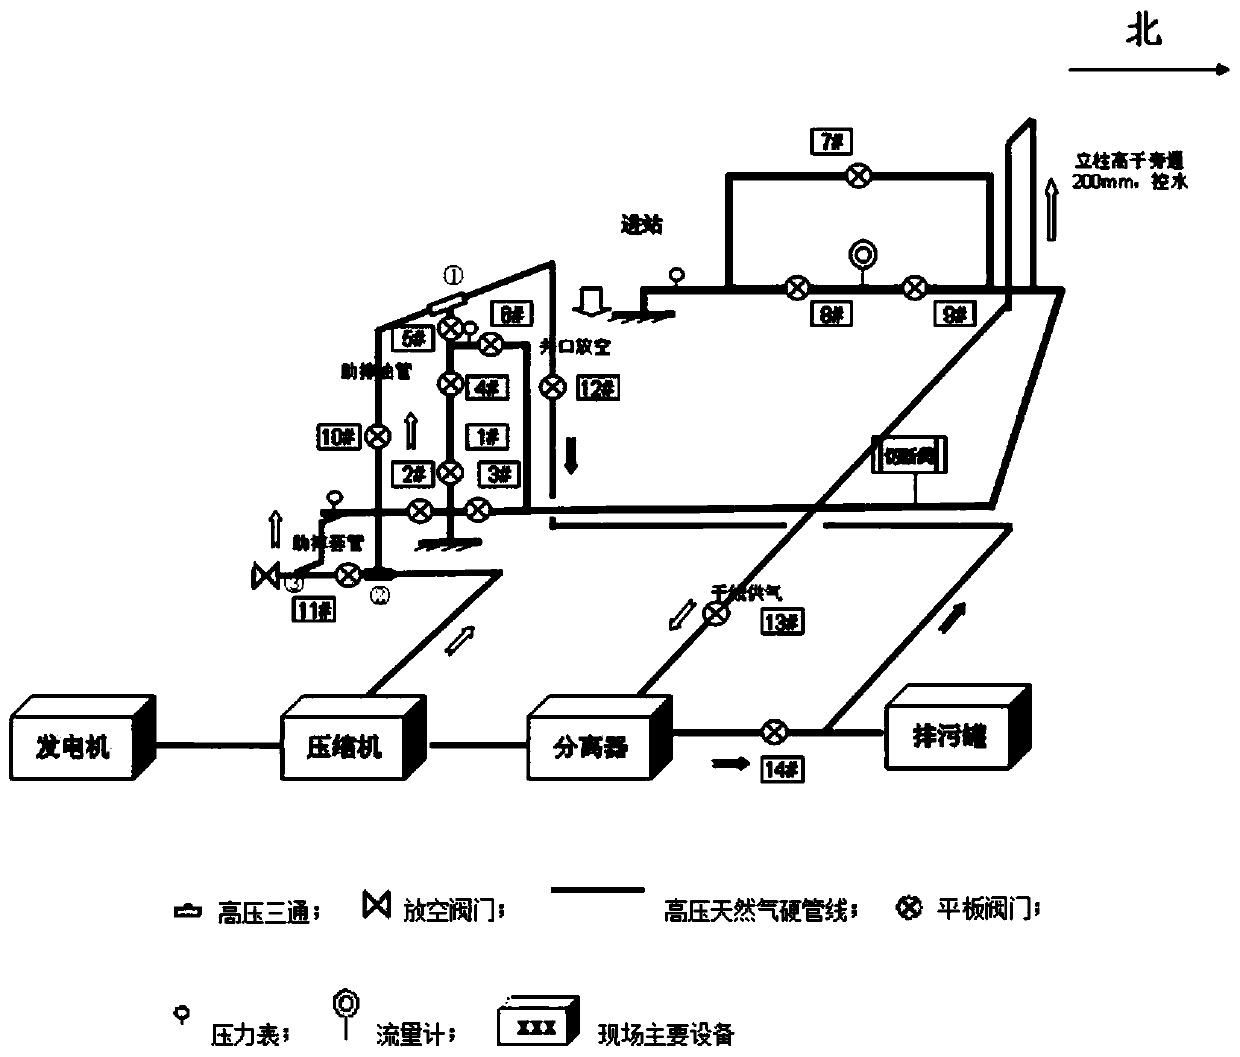 Yield increasing method for reducing pressure loss in gas well by using compressor